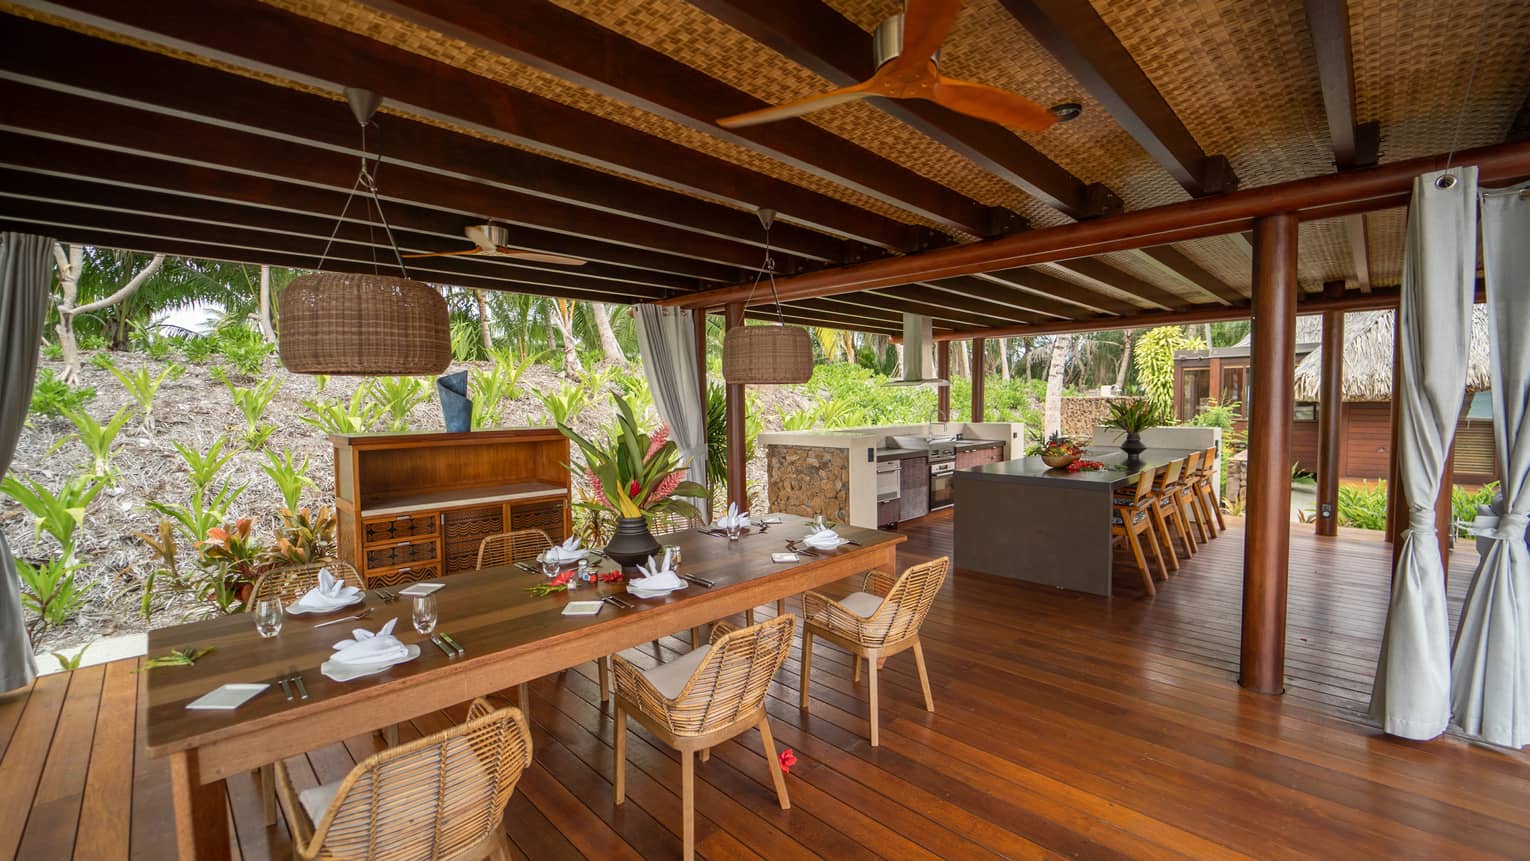 Open-air dining area with wooden floors, bamboo chairs, thatch roof